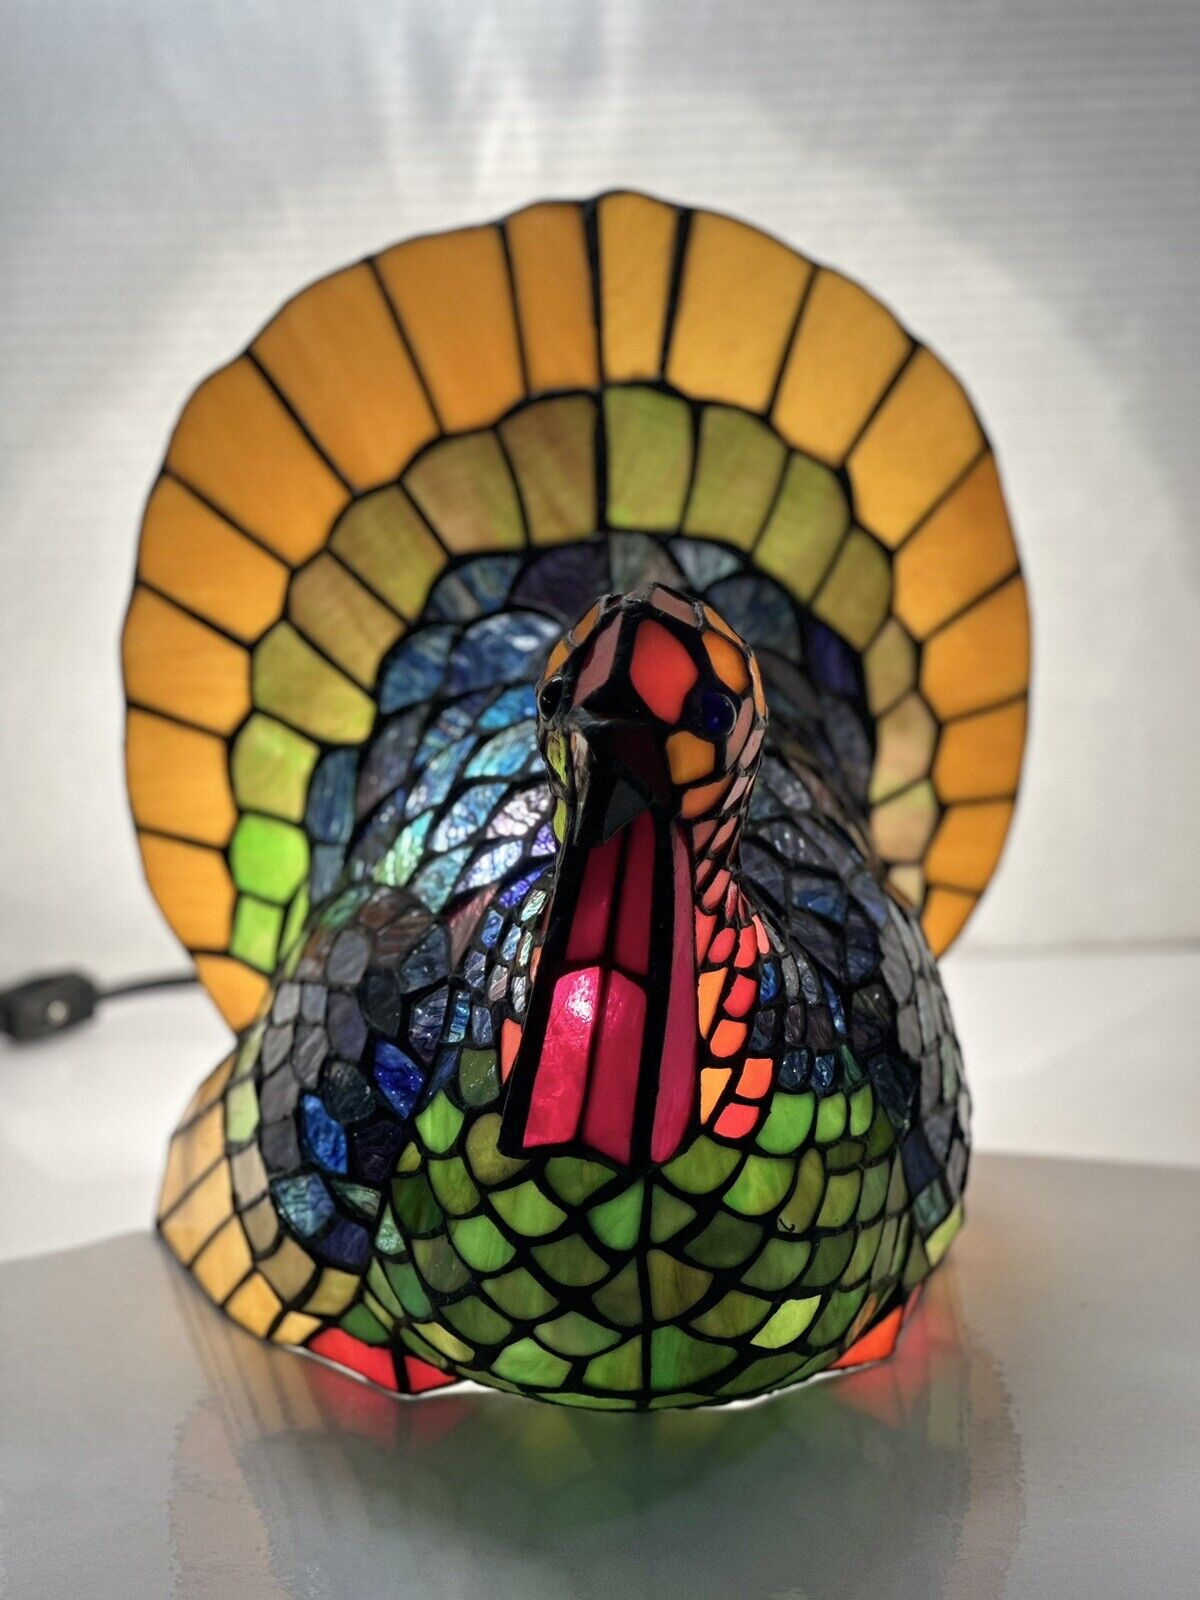 Stained Glass Turkey Lamp Tiffany Style 1960s Cracker Barrel Vibrant Colors